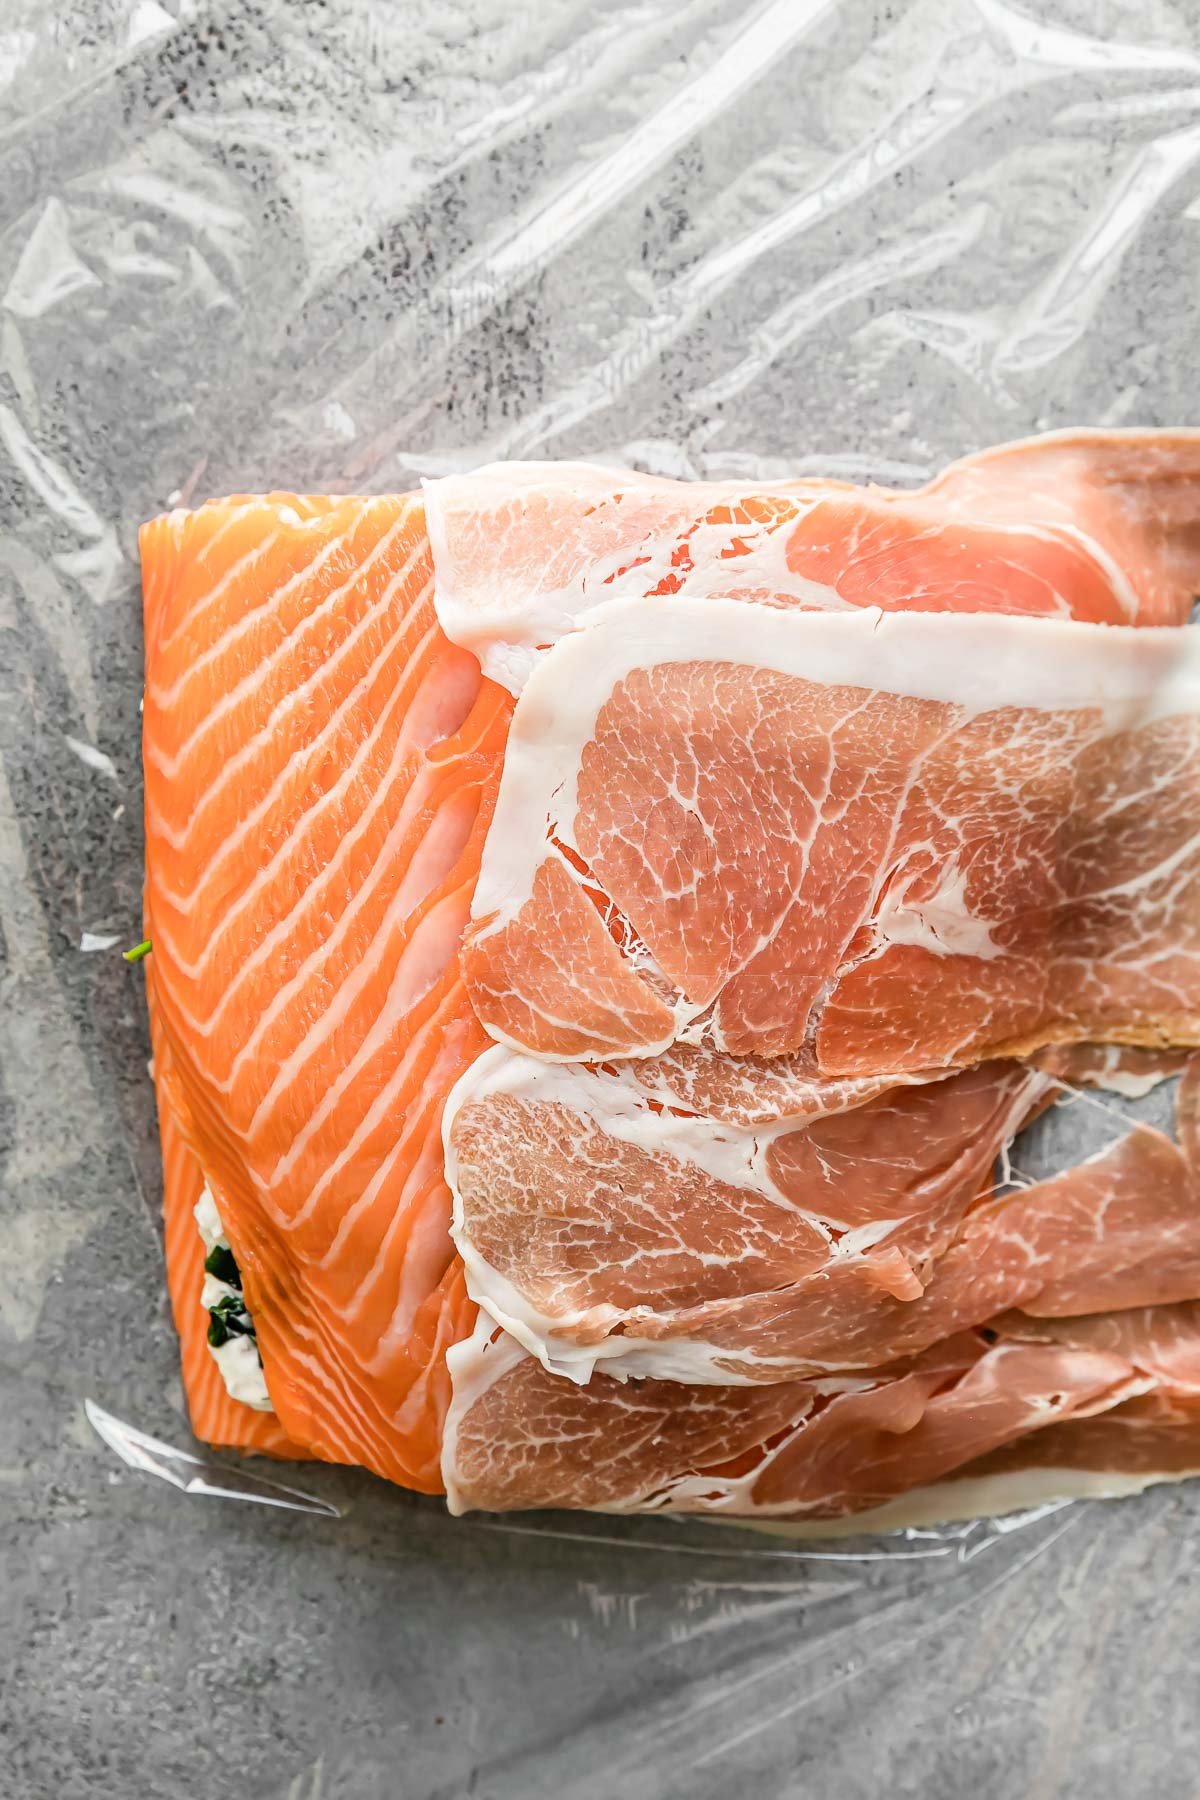 Layered salmon fillets sit atop a large piece of plastic wrap. Pieces of prosciutto are placed over top of the fillets, overlapping eachother to begin covering completely.